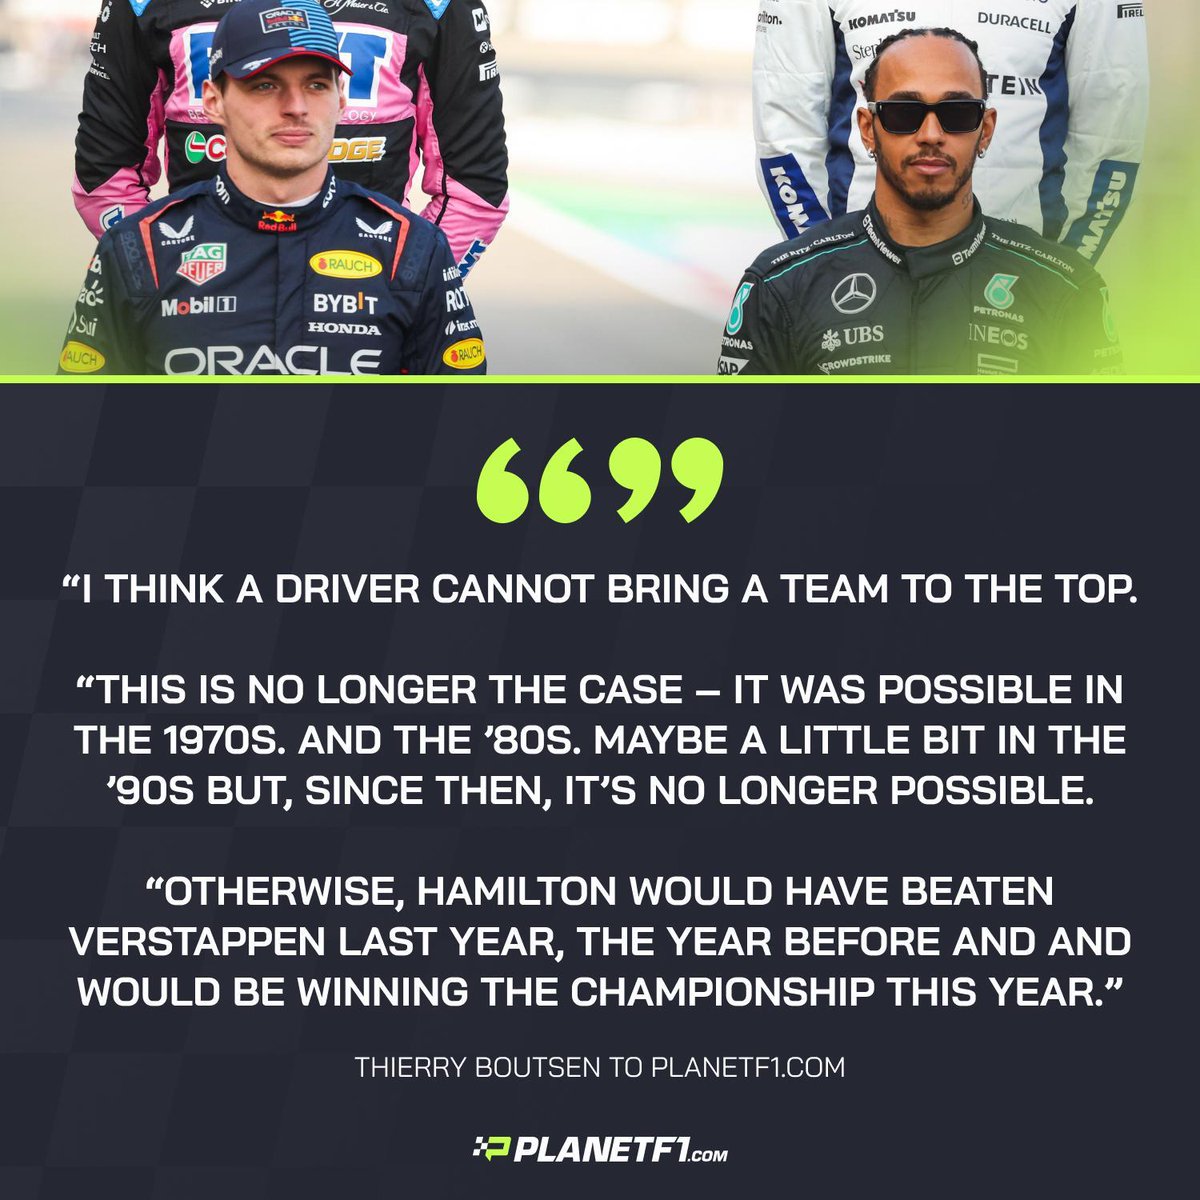 Three-time #F1 winner, Thierry Boutsen, who made 163 race starts between 1983 and 1993, thinks Lewis Hamilton would still be No.1 if the sport was built on purely on driver talent. #LewisHamilton #F1